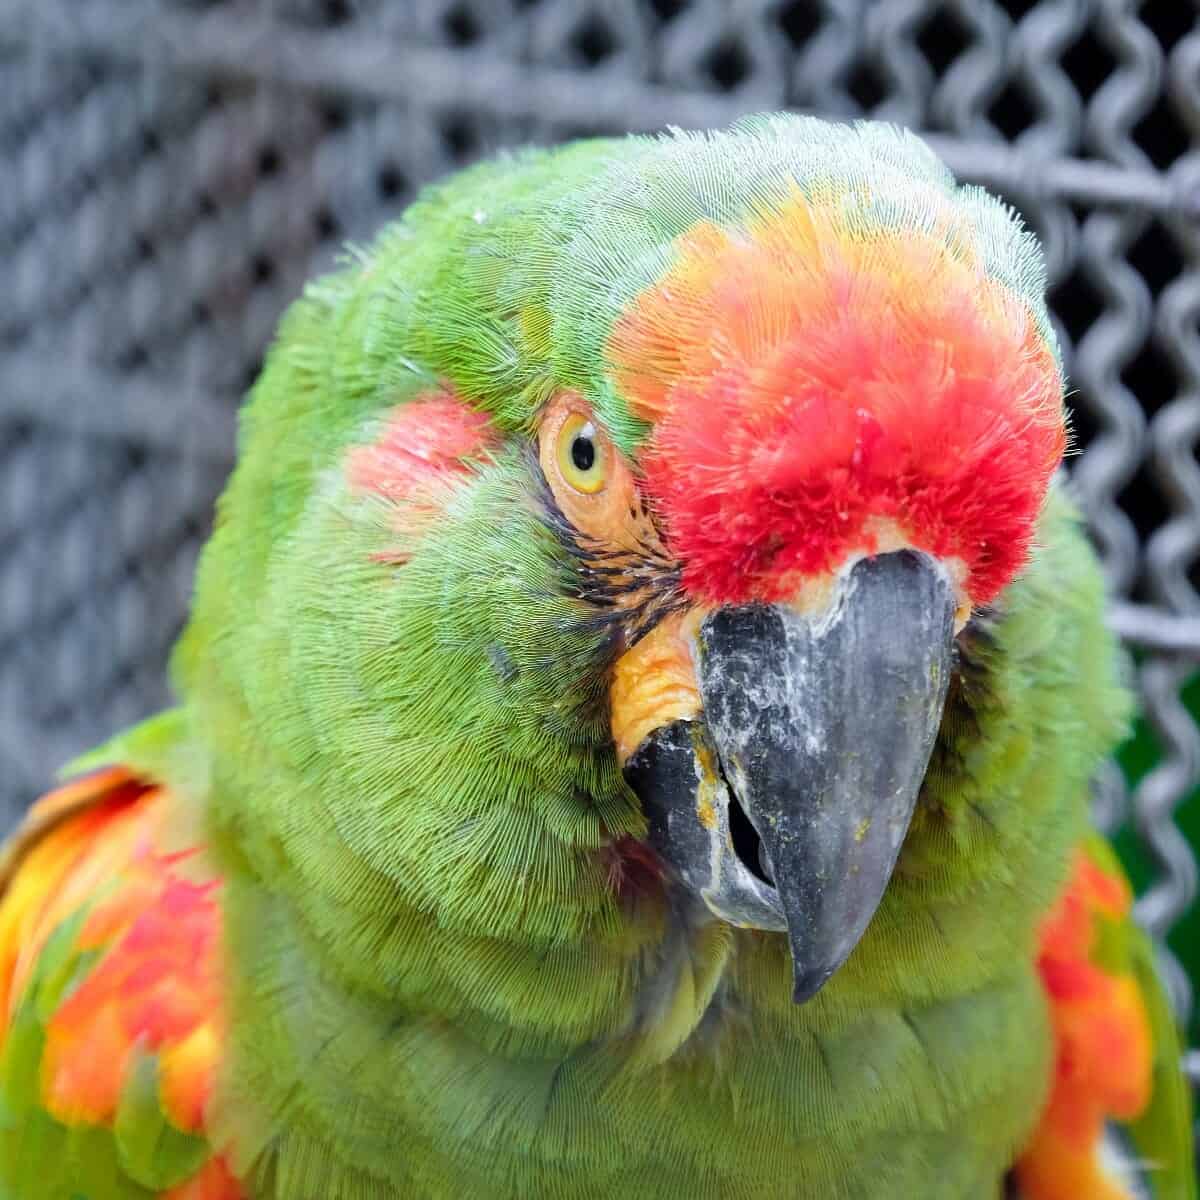 Can You List Some Techniques to Keep Pet Birds From Getting Hormonal?